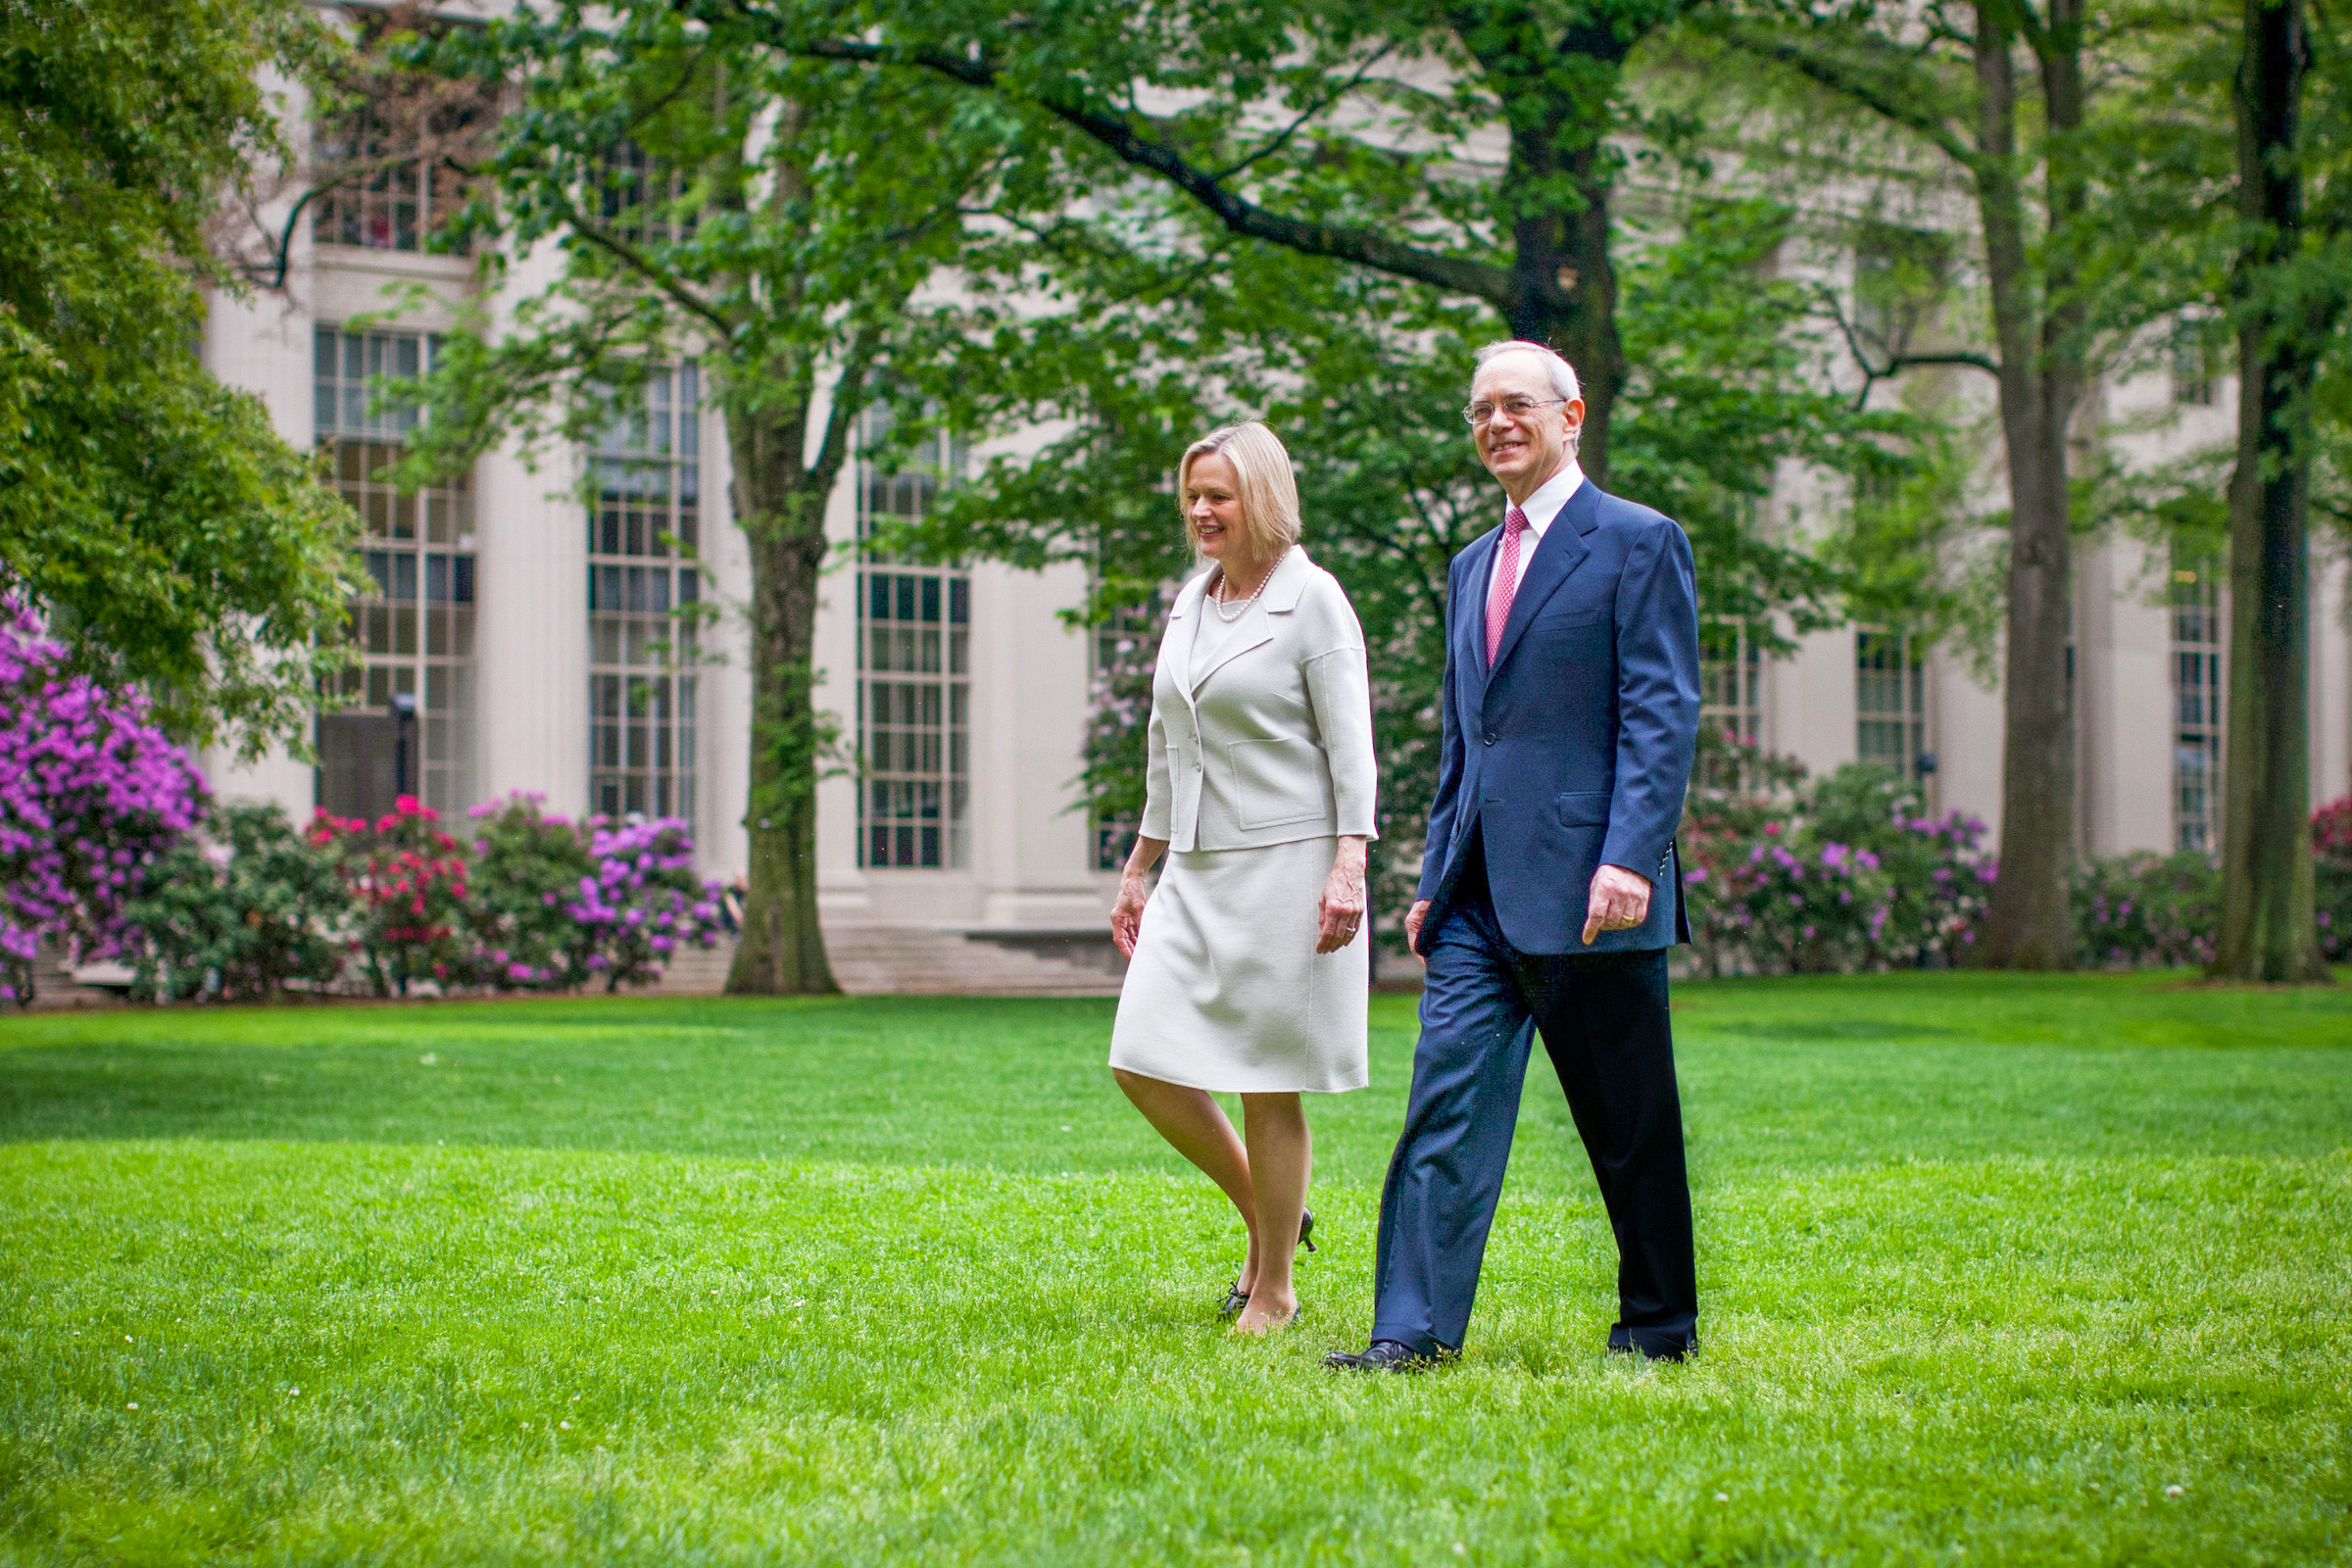 President Reif and his wife cross the lawn at MIT